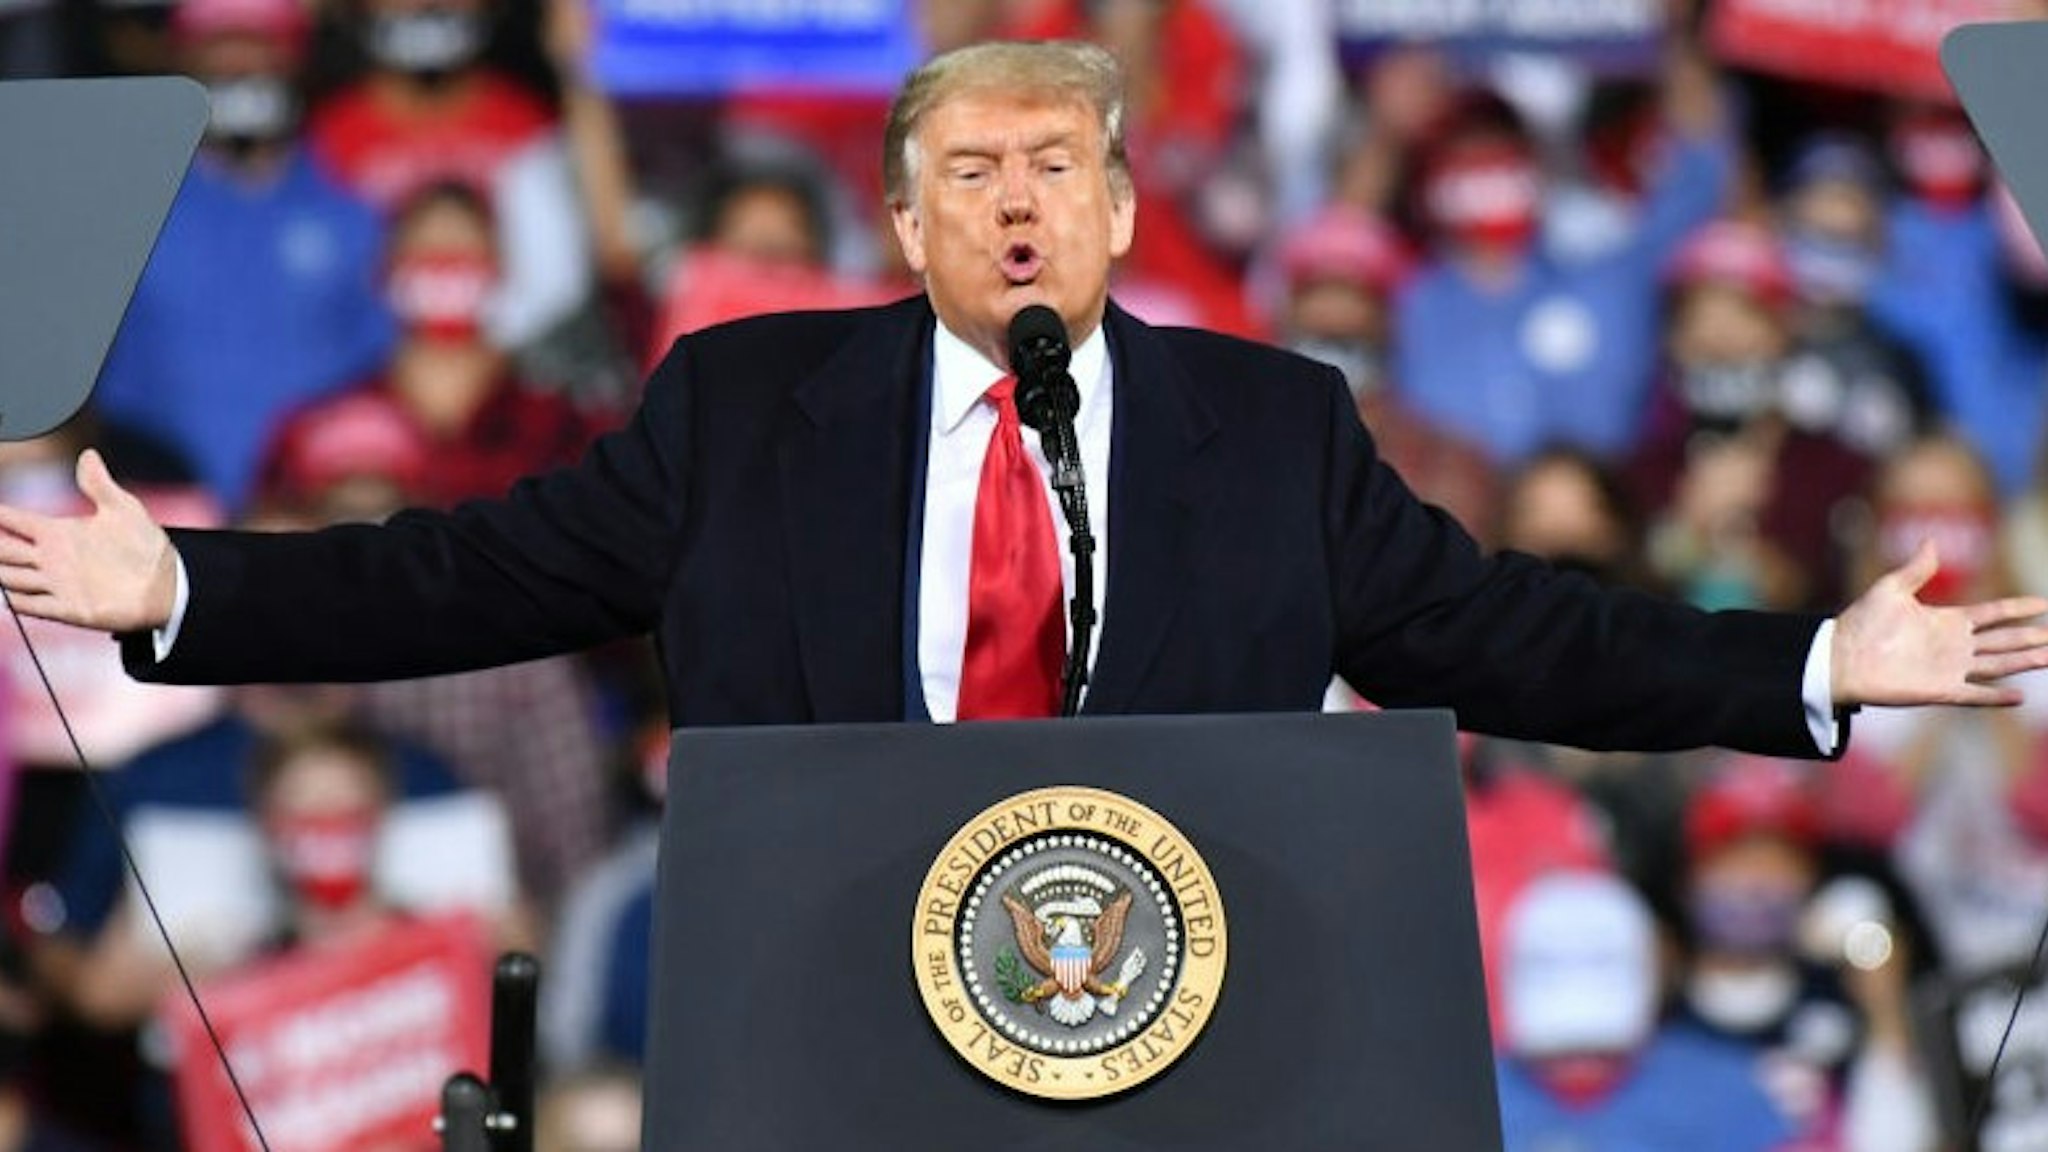 FAYETTEVILLE, USA - SEPTEMBER 19: US President Donald Trump speaks during a Make America Great Again campaign rally in Fayetteville, North Carolina, United States on September 19, 2020. (Photo by